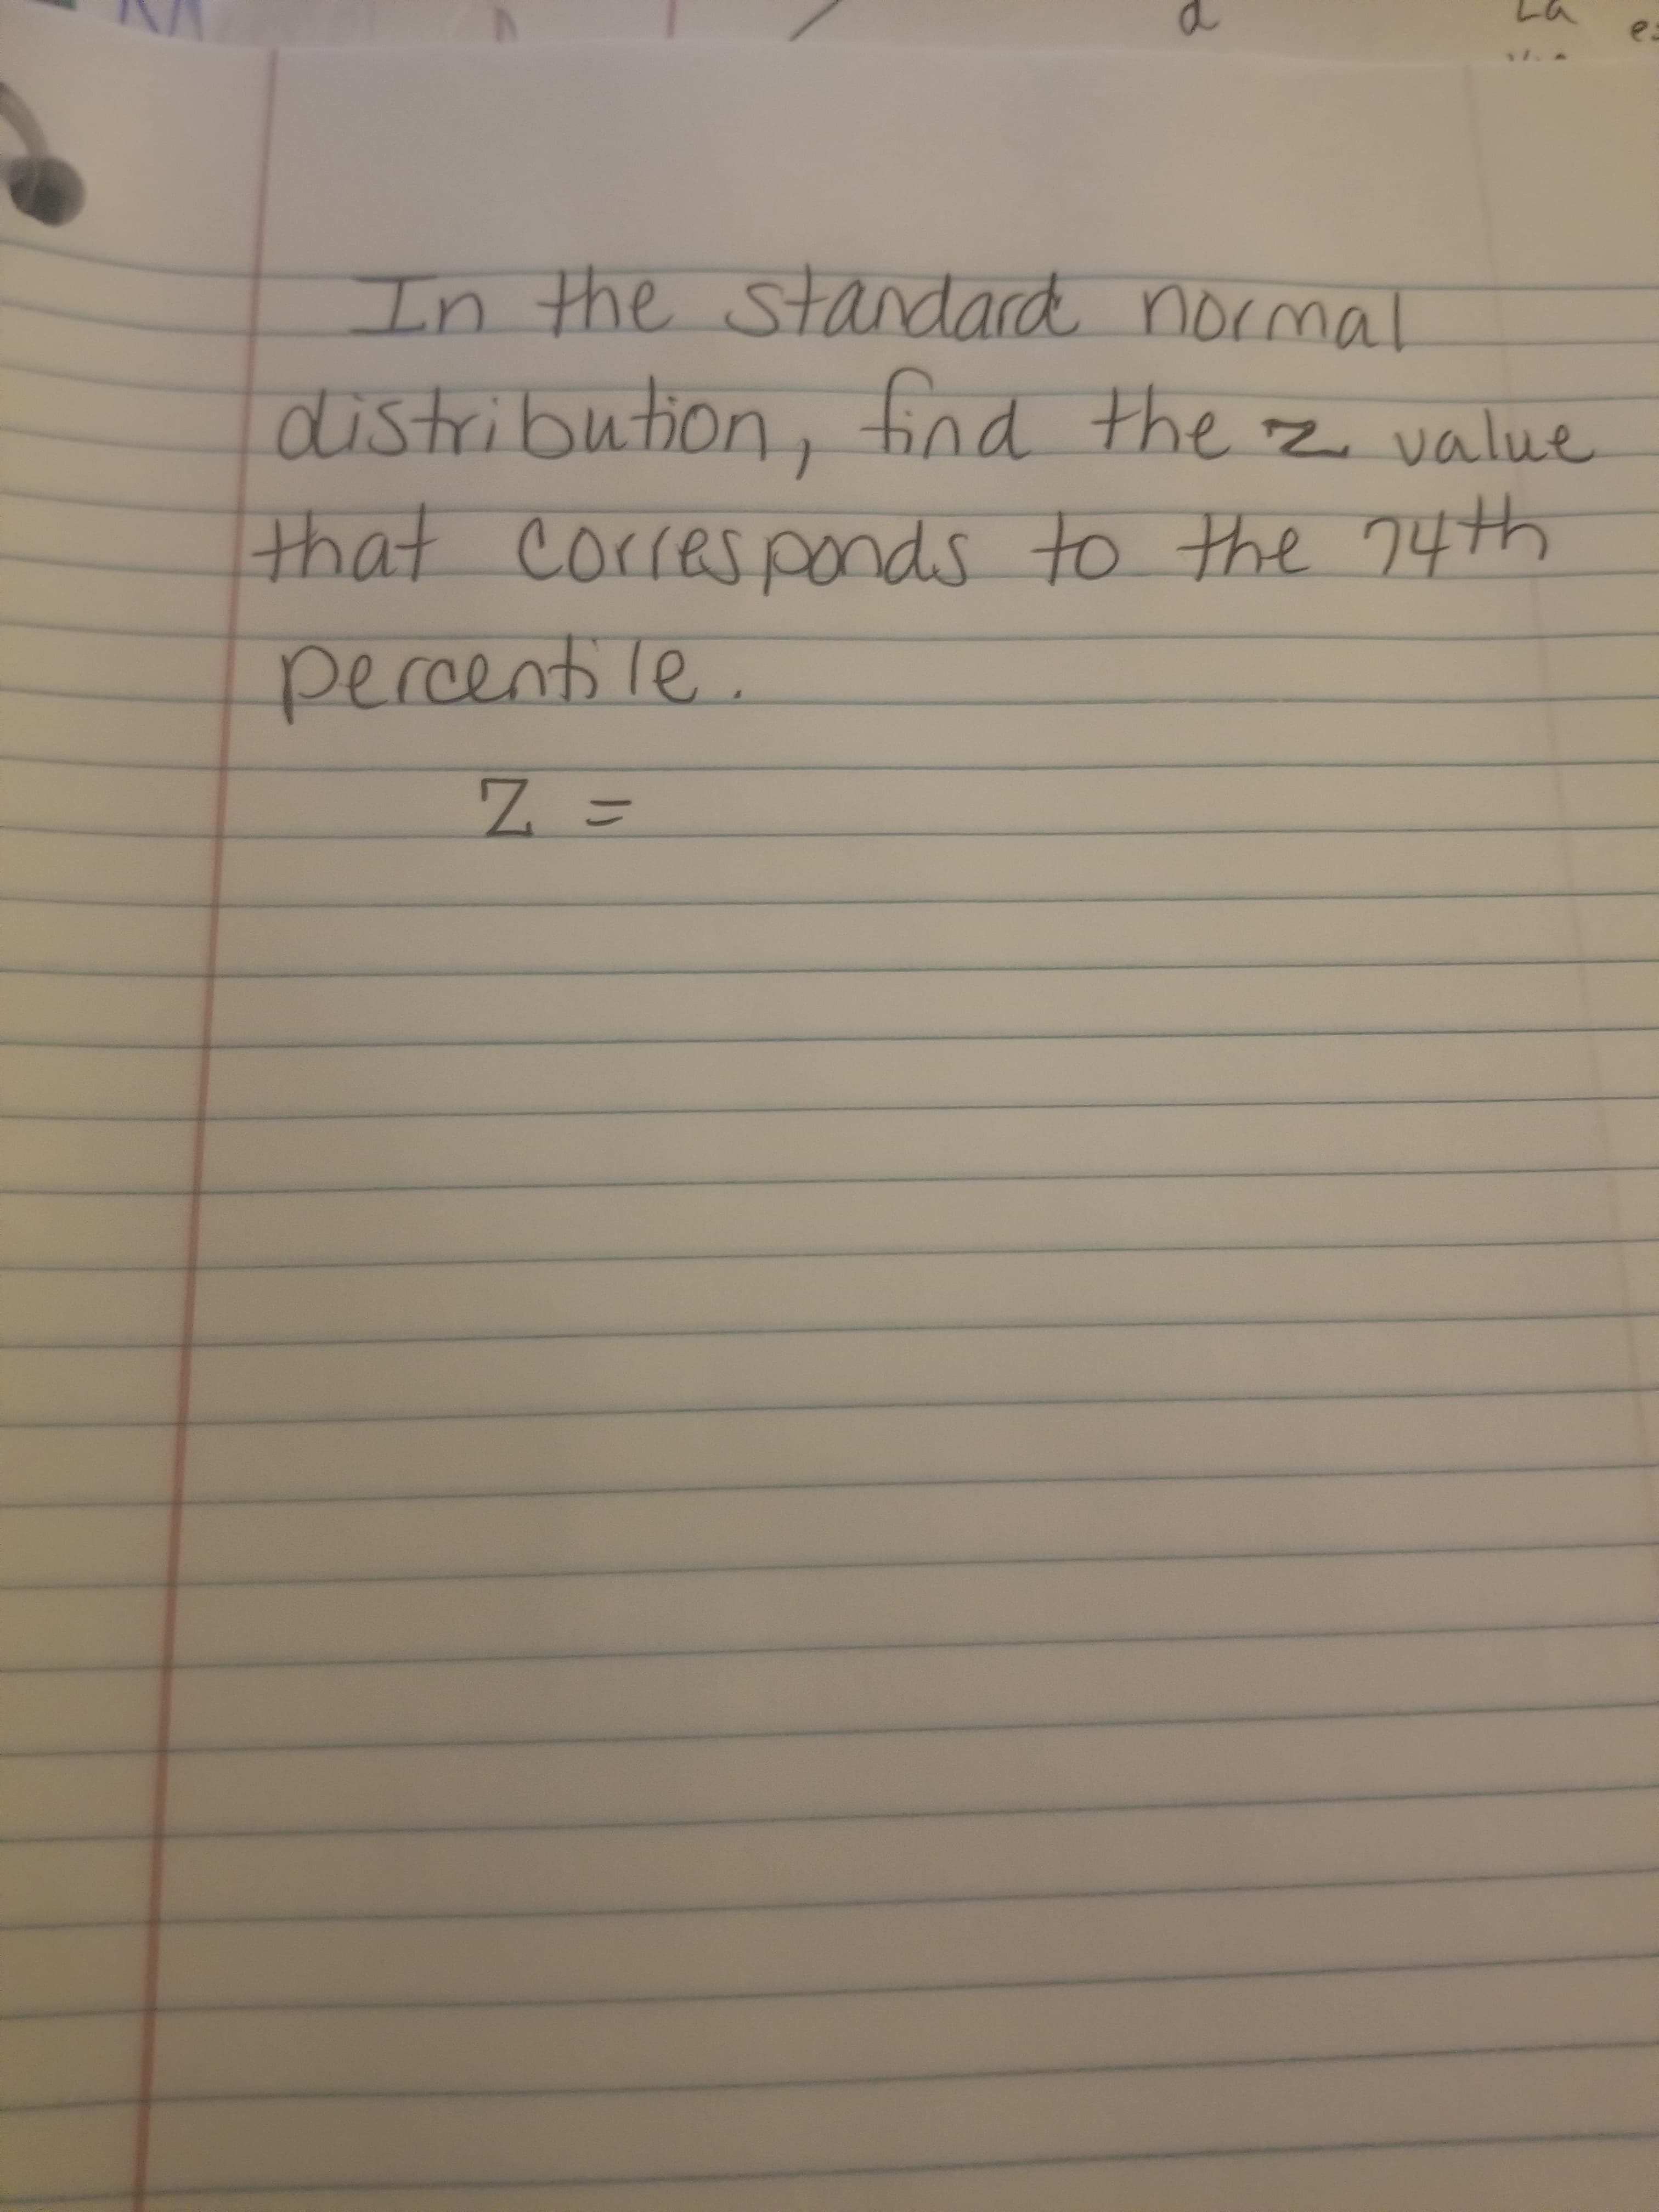 Ln the standard normal
distribution
5nd the z value
that Corresponds to the 74th
percent le
